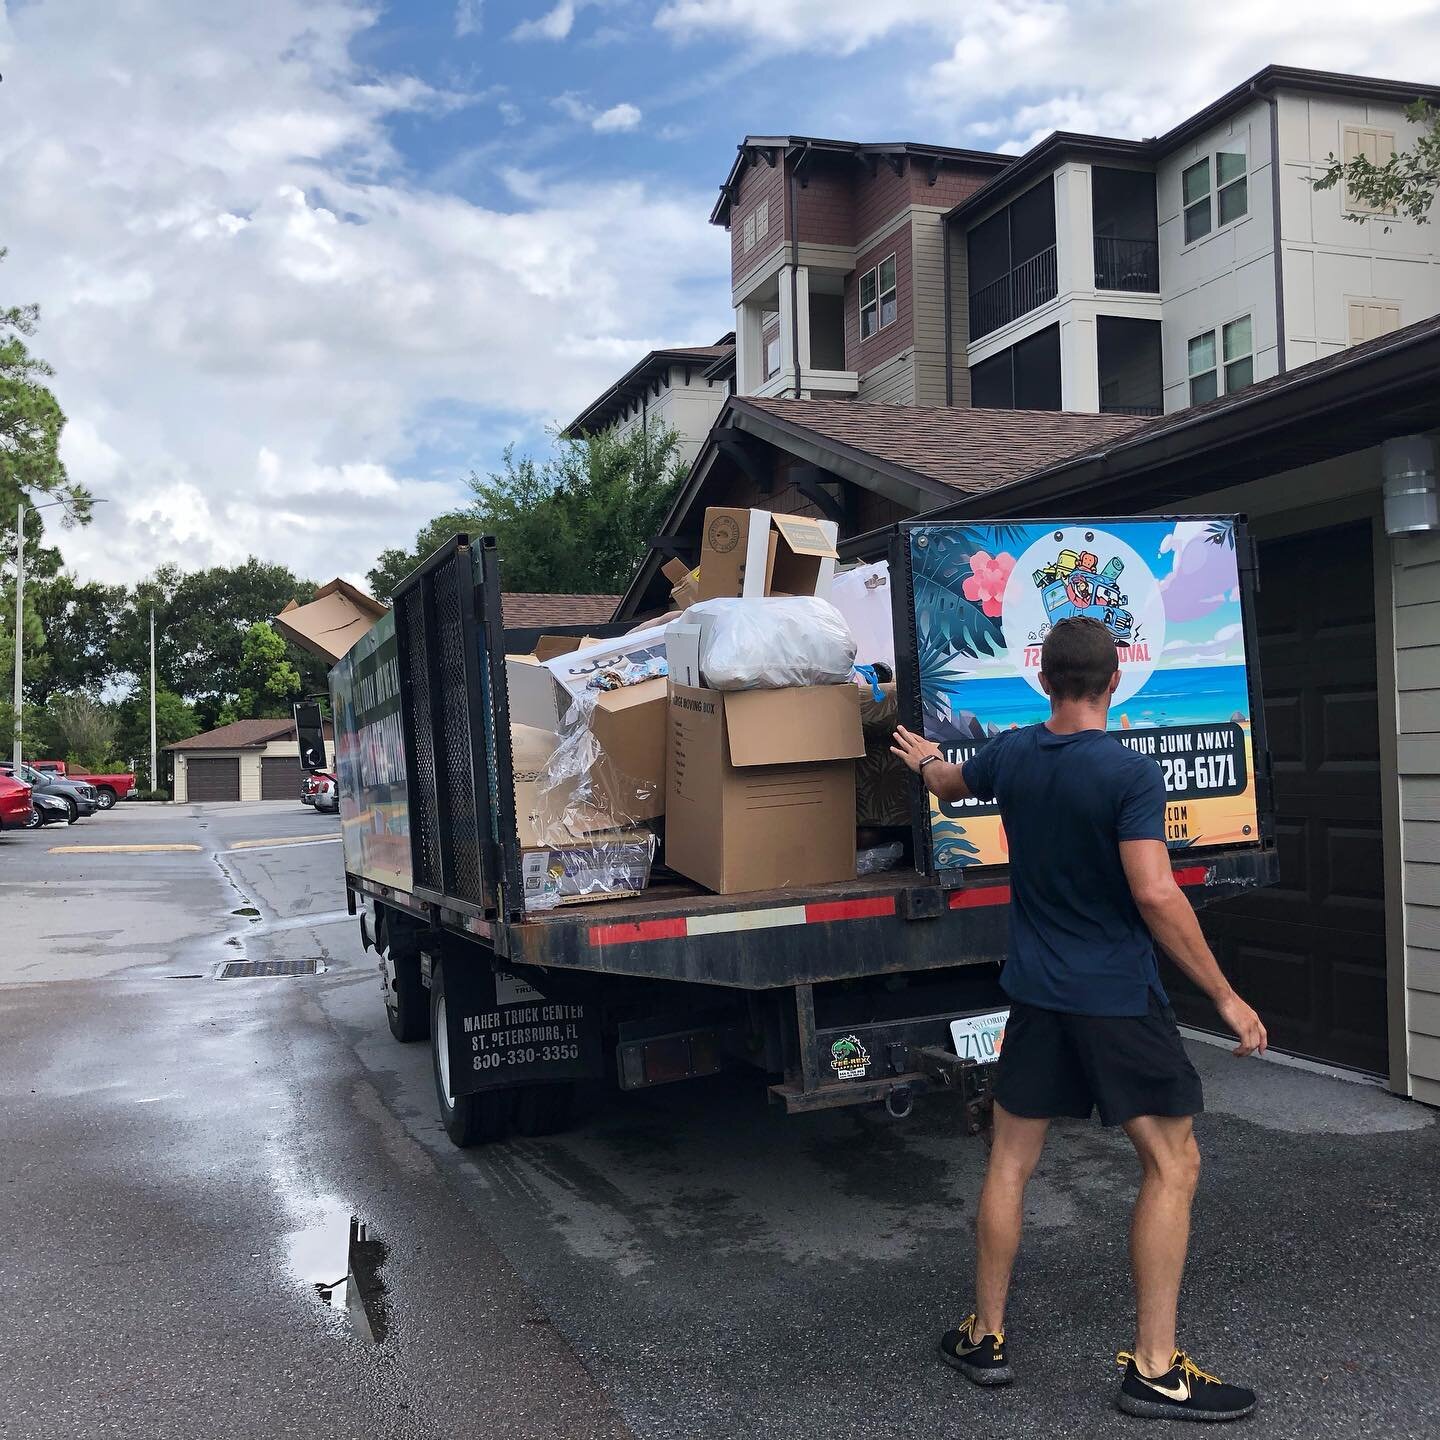 Think outside the box 📦! 🚂 🗑
&bull;
📲 Call For Instant Quote!
(727) 828-6171
&bull;
Call today for a FREE quote to haul your junk. Services starting as low as $99 including dump fees.
&bull;
What&rsquo;s covered? Construction debris 🔨 , househol